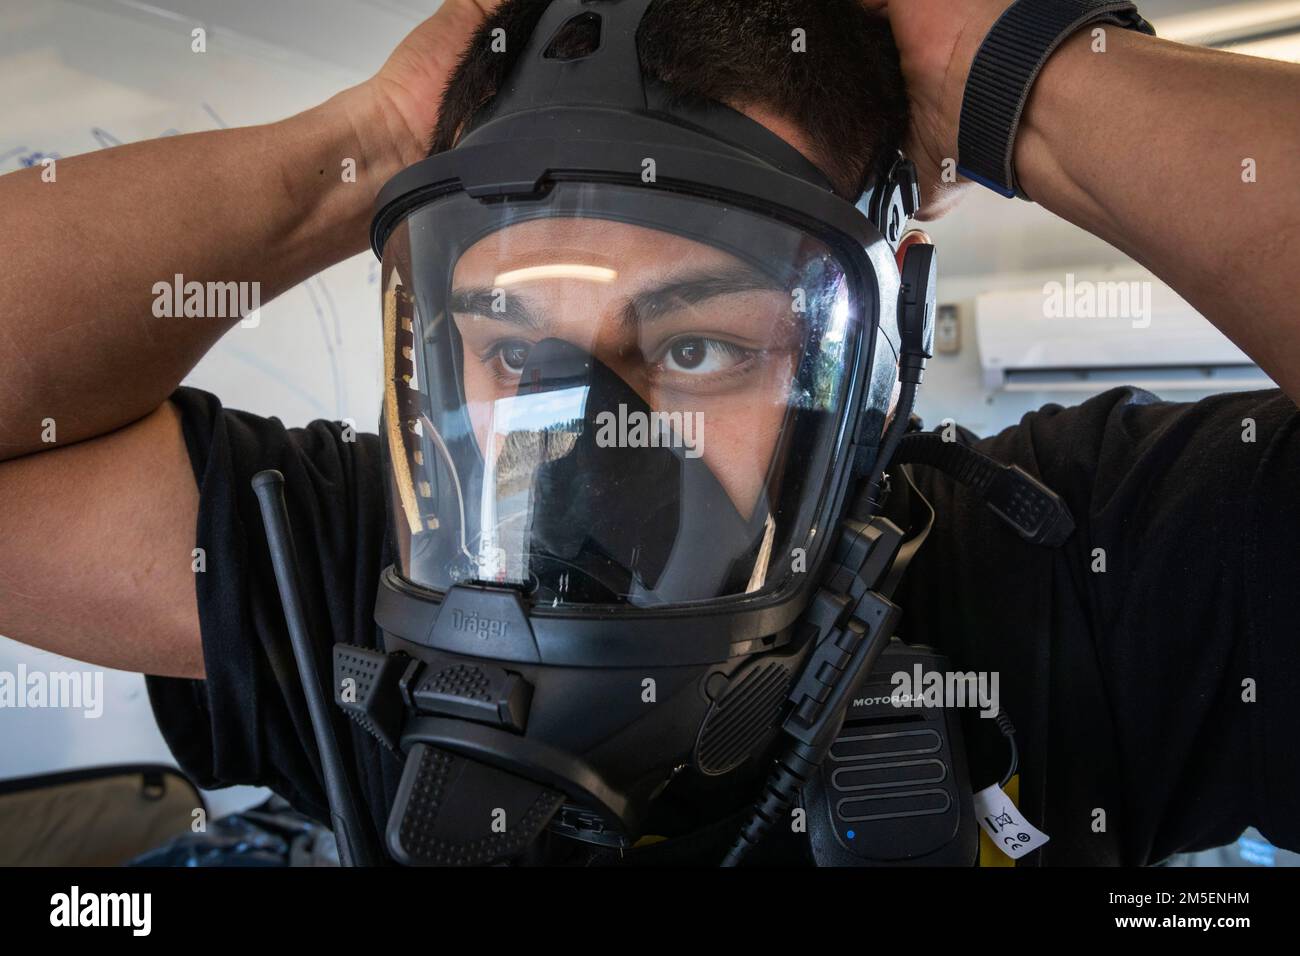 U.S. Army Sgt. Christopher Mejia, survey team member, 21st Weapons of Mass Destruction-Civil Support Team (21st WMD-CST), New Jersey National Guard, dons his self-contained breathing apparatus during an Army North training exercise at the William J. Hughes Technical Center, Federal Aviation Administration, Egg Harbor Township, New Jersey, March 3, 2022. The 21st identifies chemical, biological, radiological, and nuclear substances; assesses and advises civil authorities on response measures to man-made or natural disasters. (New Jersey National Guard photo by Mark C. Olsen) Stock Photo